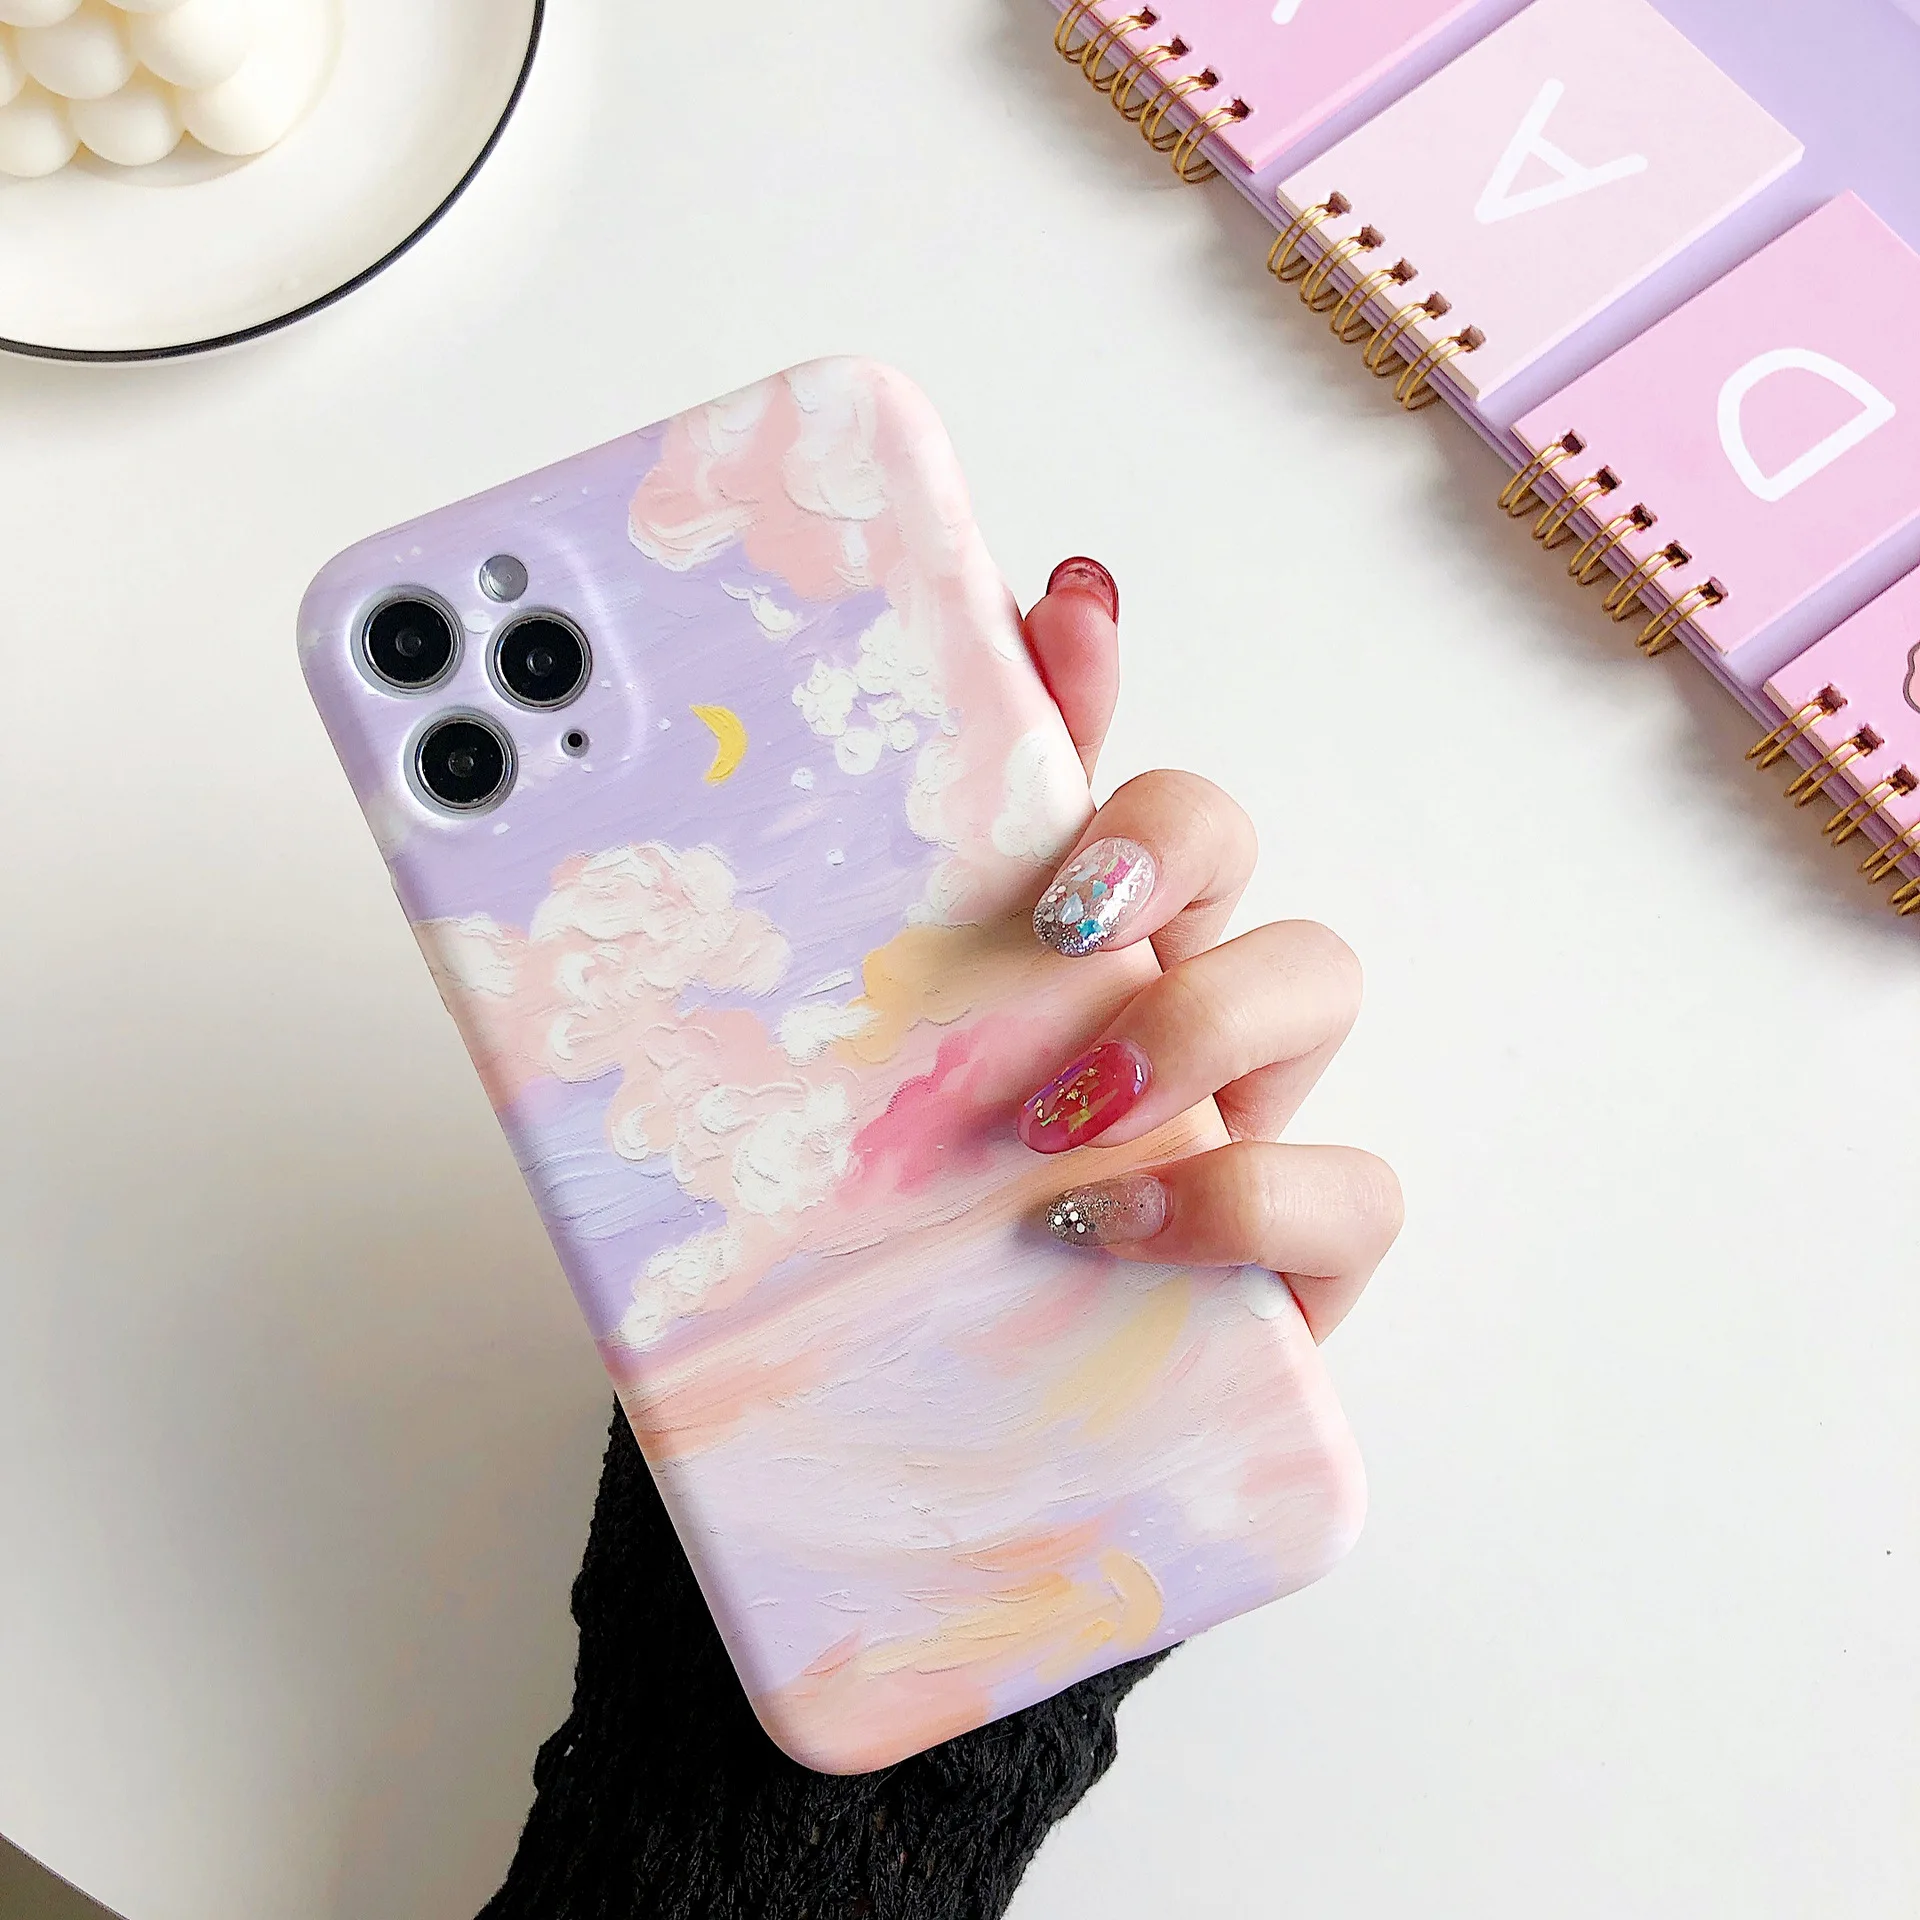 Retro Art Oil Painting Phone Case For iPhone 13 Xs 12Pro 8Puls Landscape Clouds Cases For iphone XR 11 Soft Silicone Cover coque